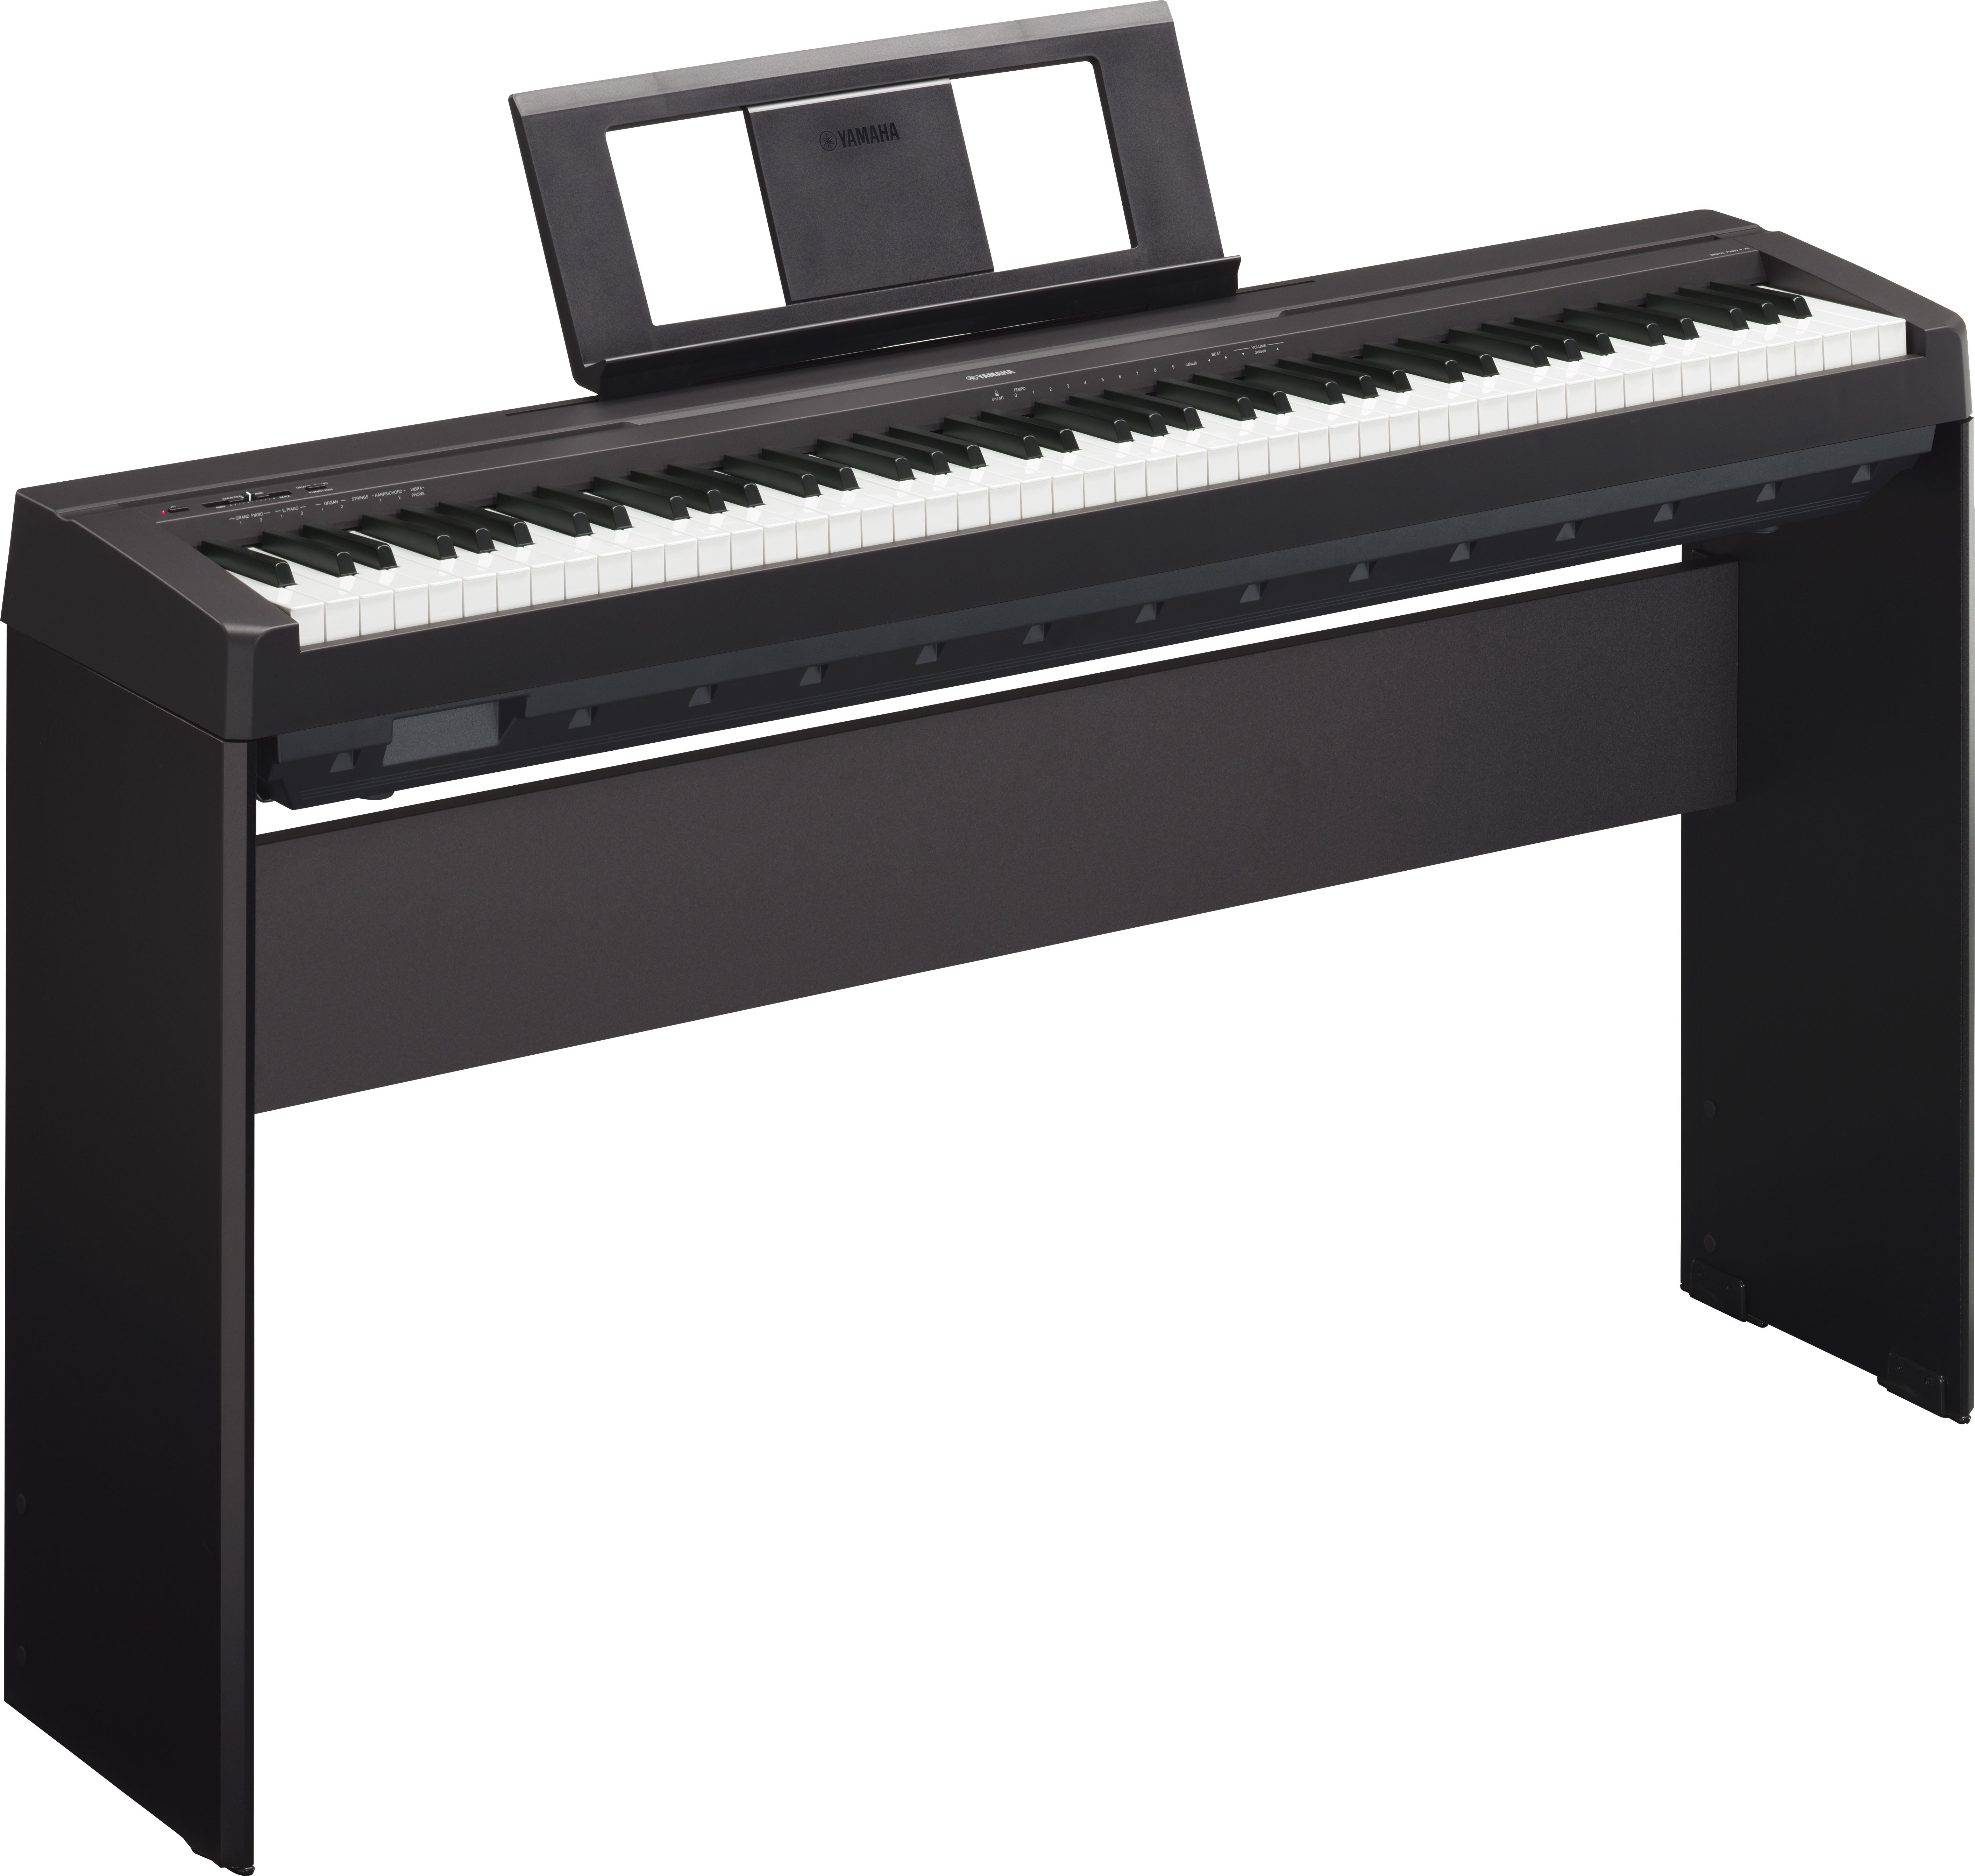 P-45 - Overview - Portables - Pianos - Musical Instruments 